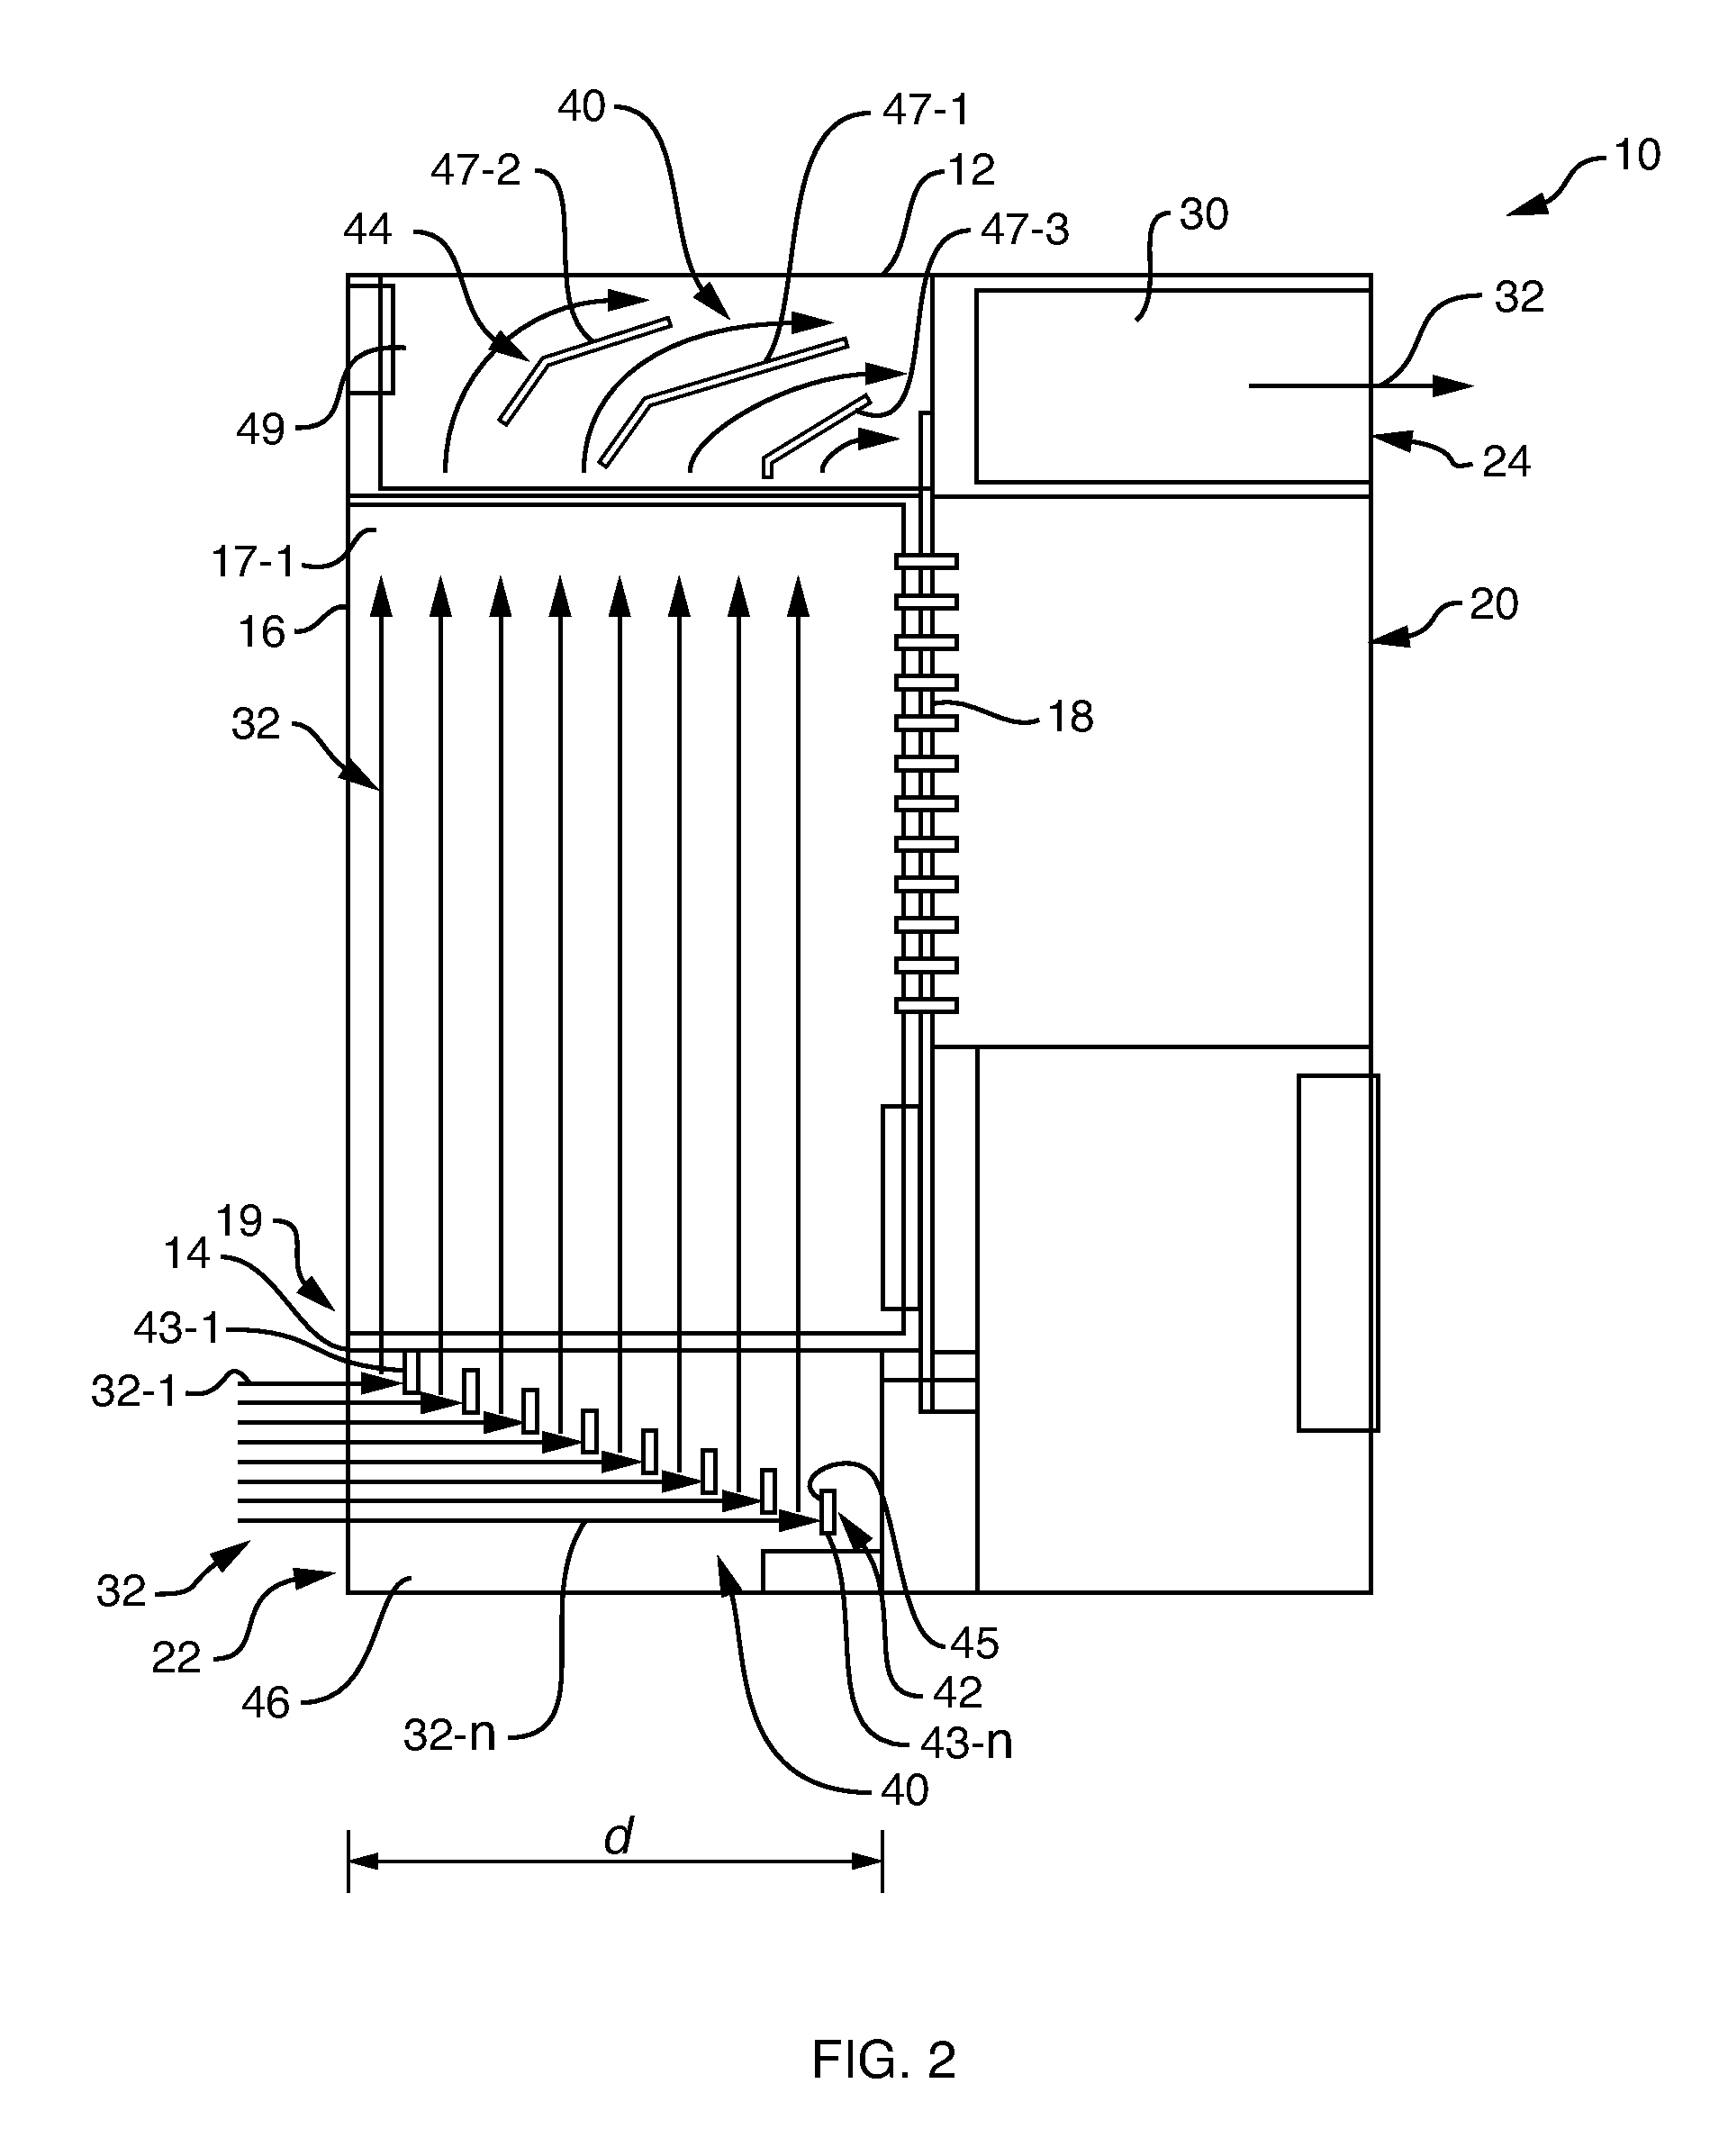 Method and apparatus for providing thermal management in an electronic device